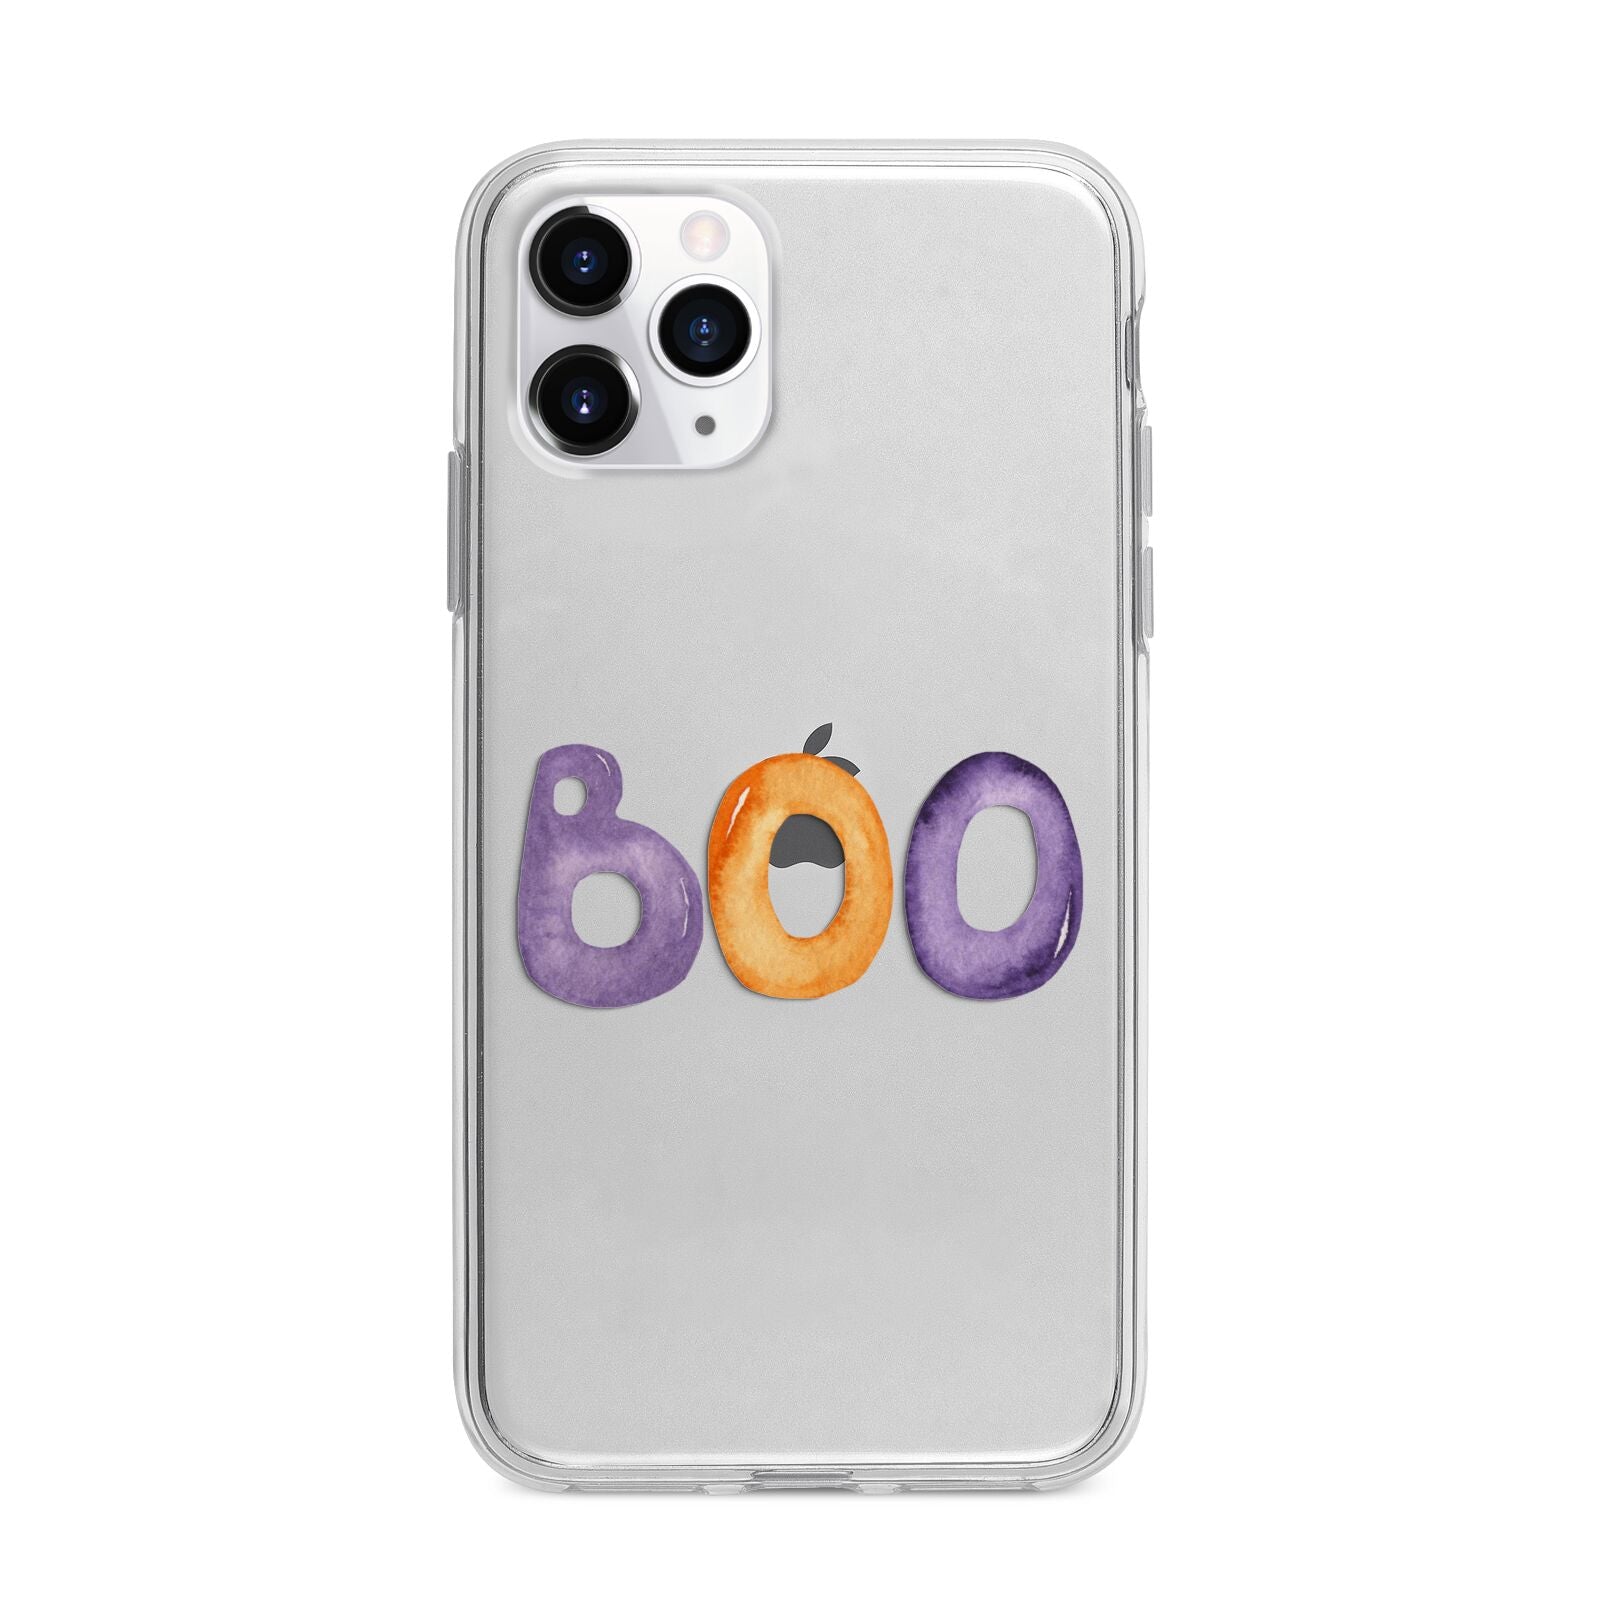 Boo Apple iPhone 11 Pro in Silver with Bumper Case